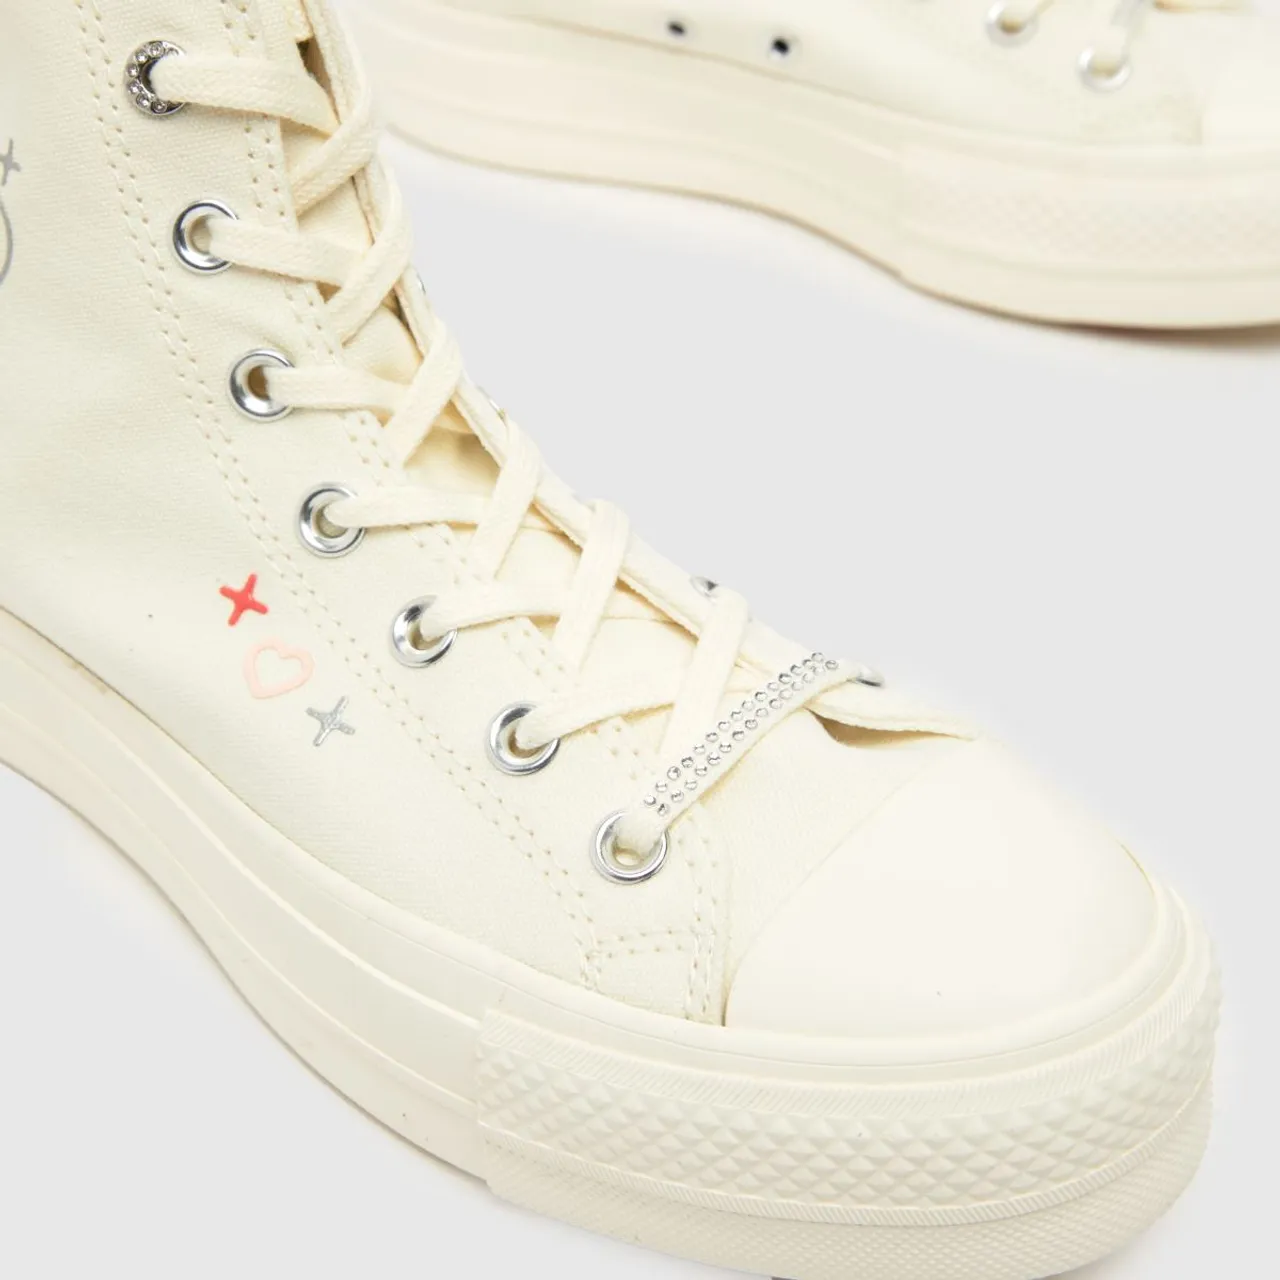 Converse all Star Lift hi y2k Heart Trainers in Off-white